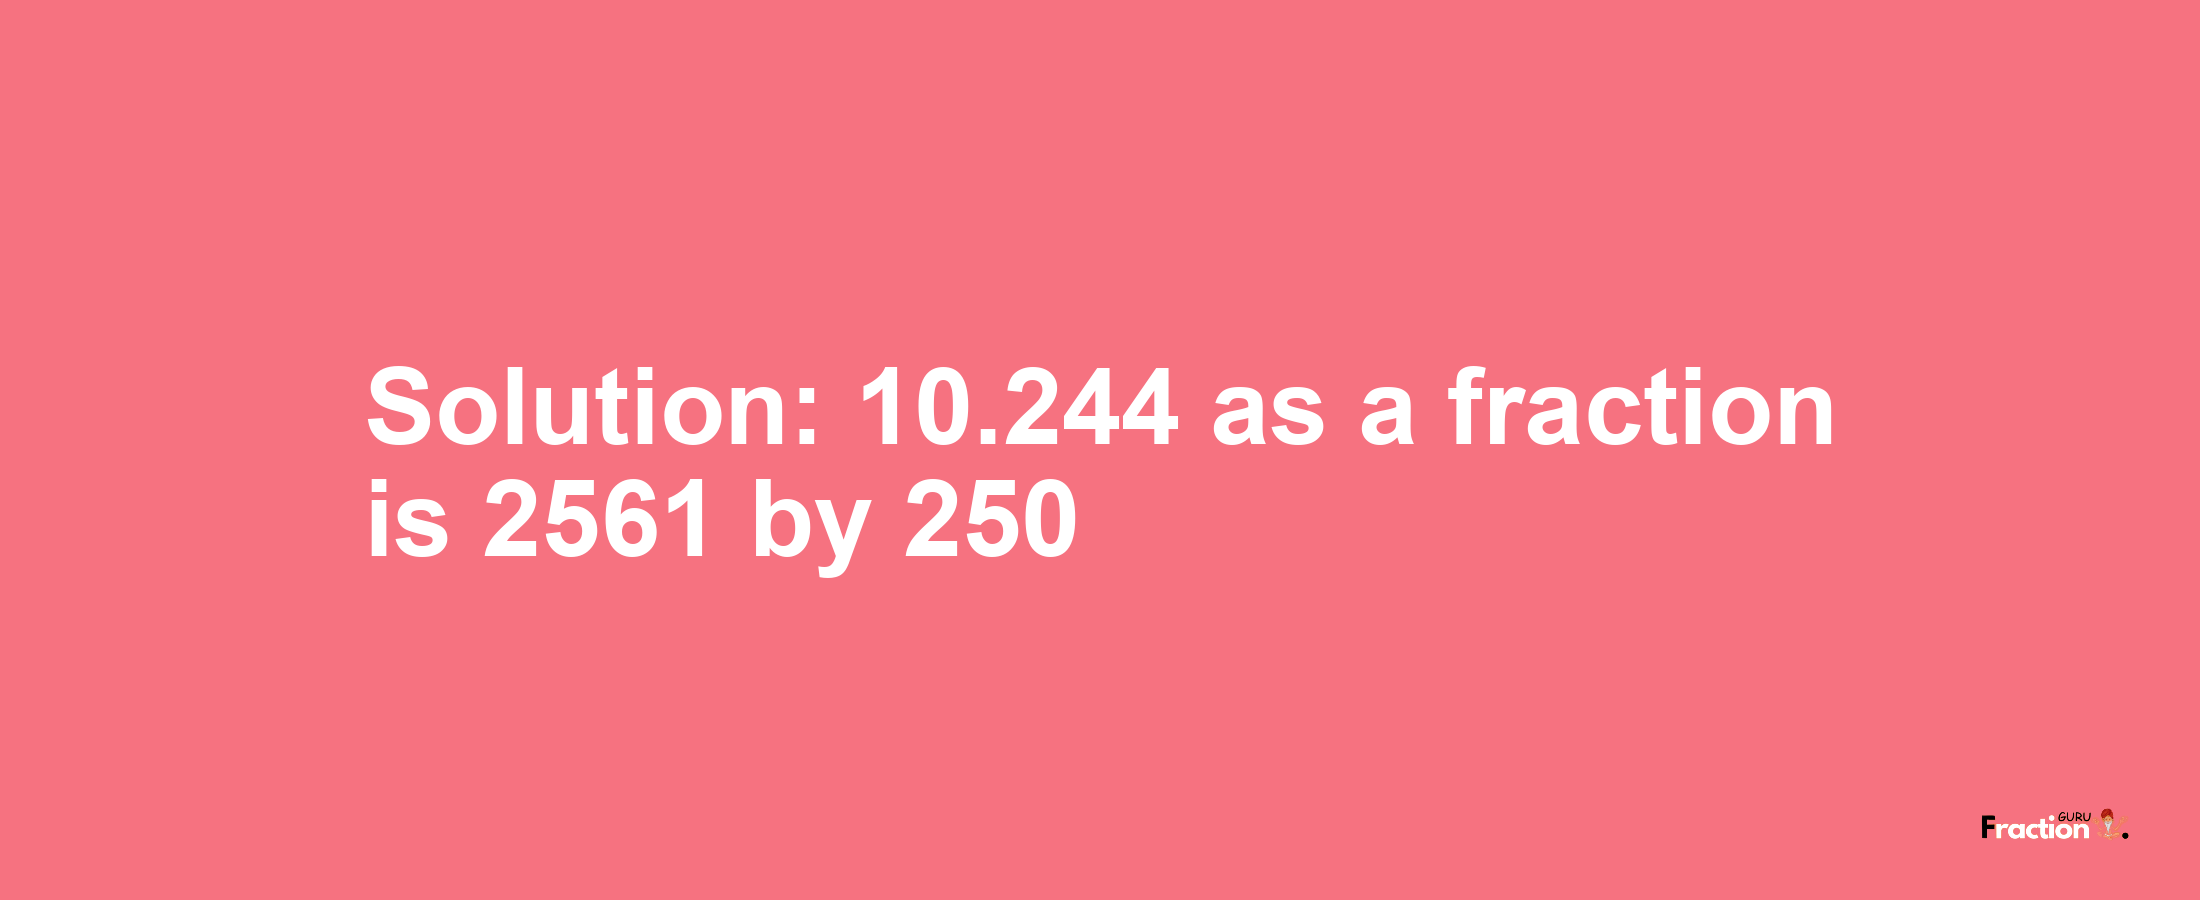 Solution:10.244 as a fraction is 2561/250